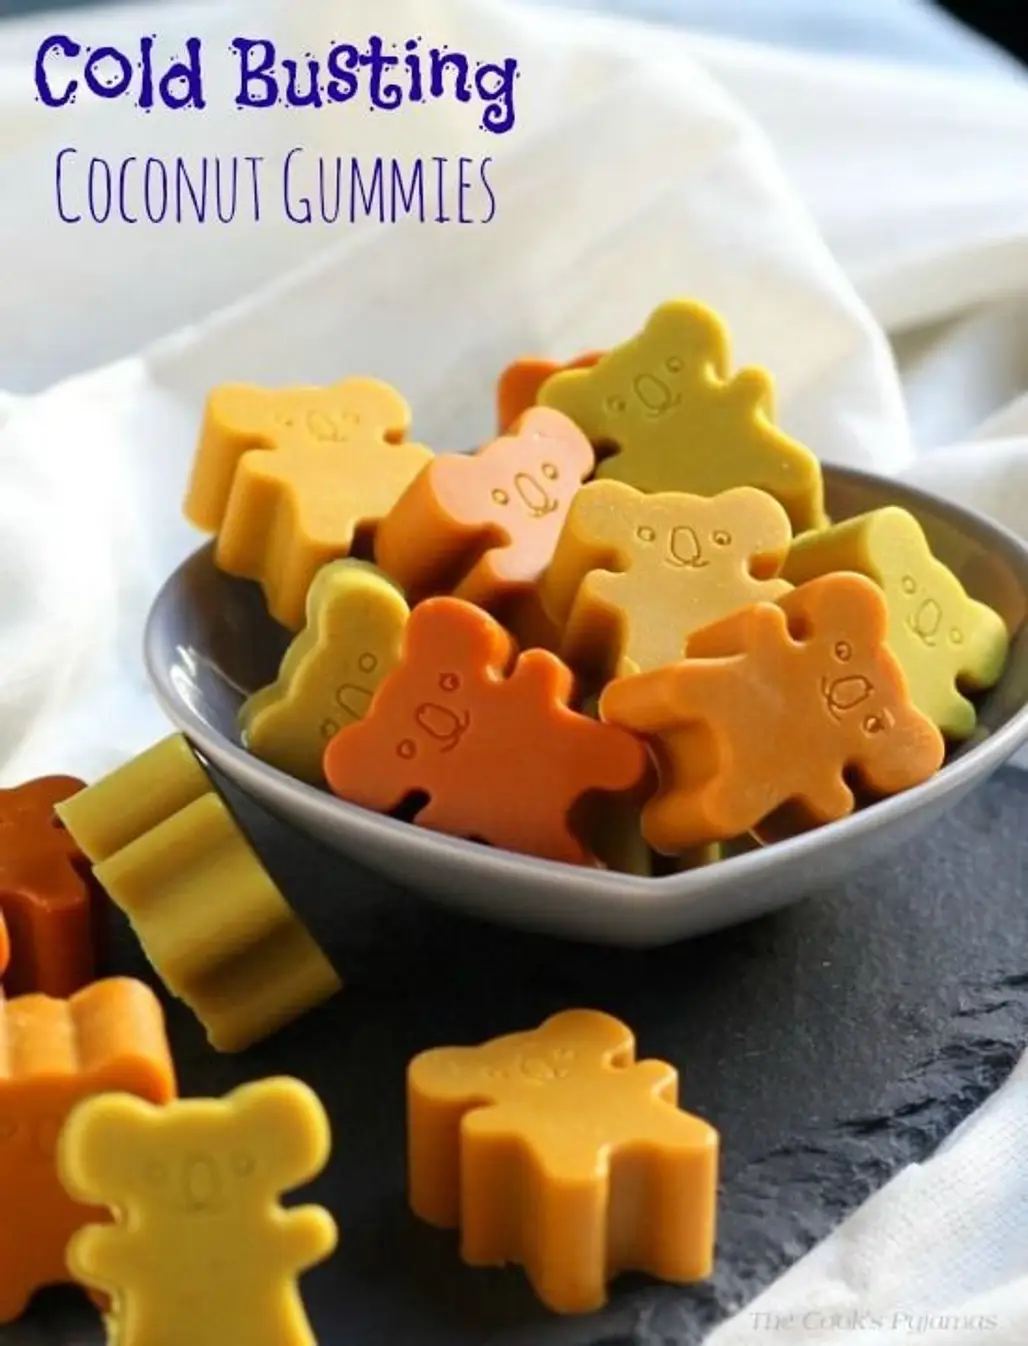 Cold-Busting Coconut Gummies